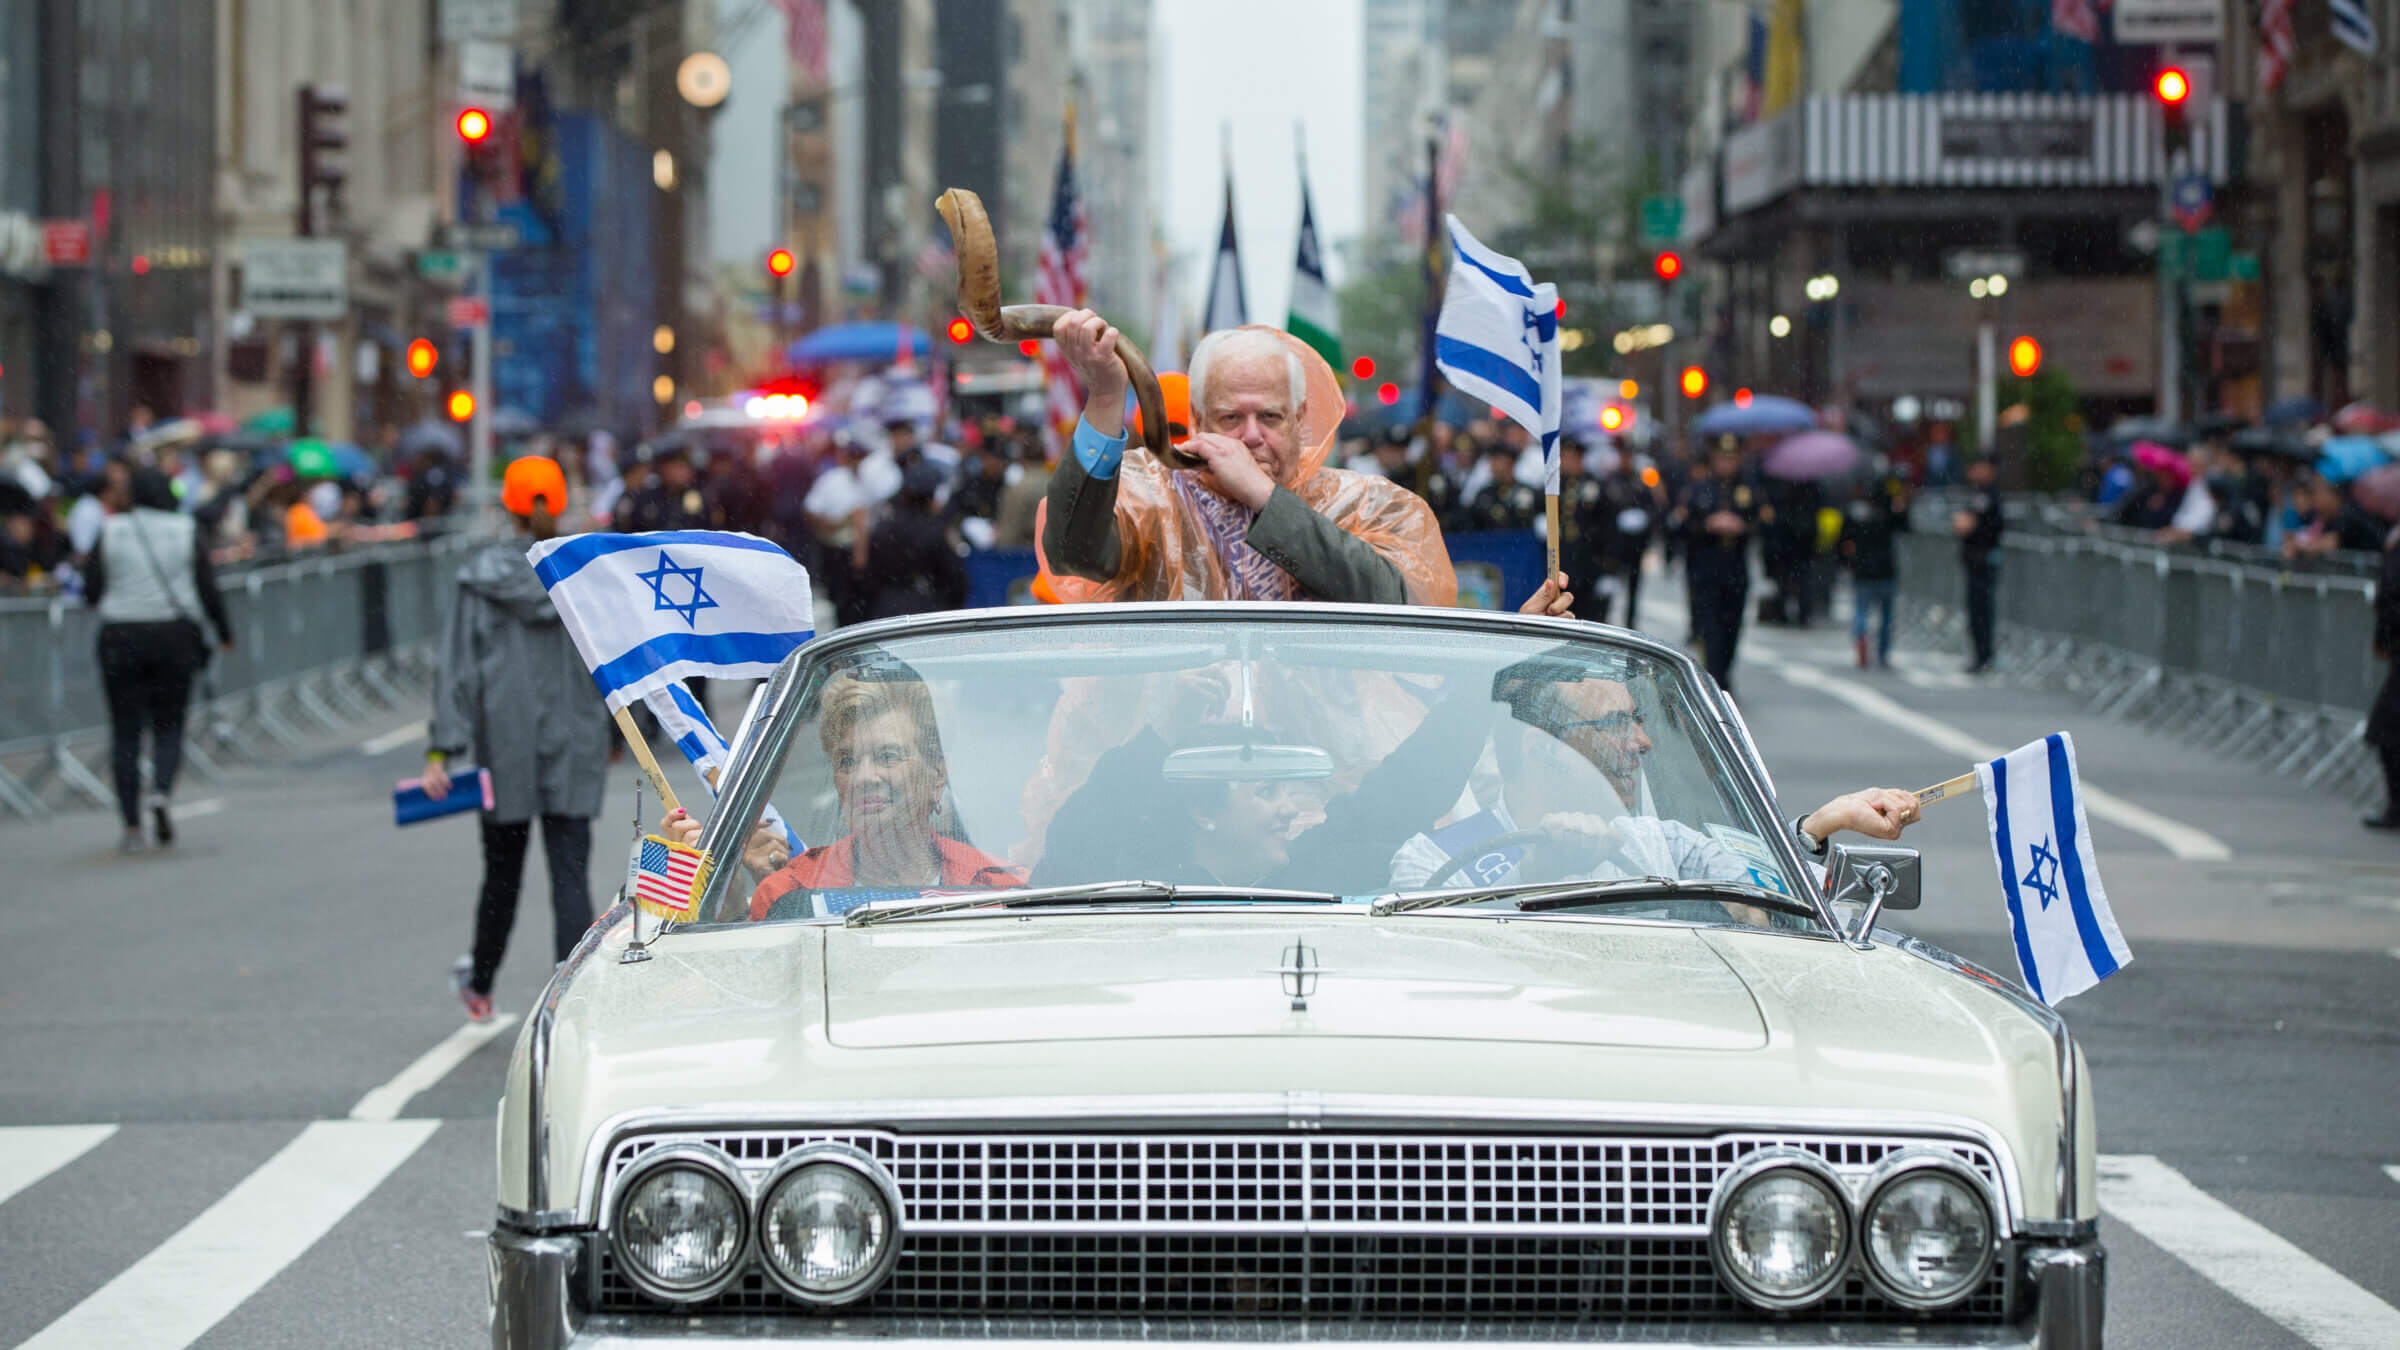 The annual Celebrate Israel parade on Fifth Avenue, June 5, 2016.